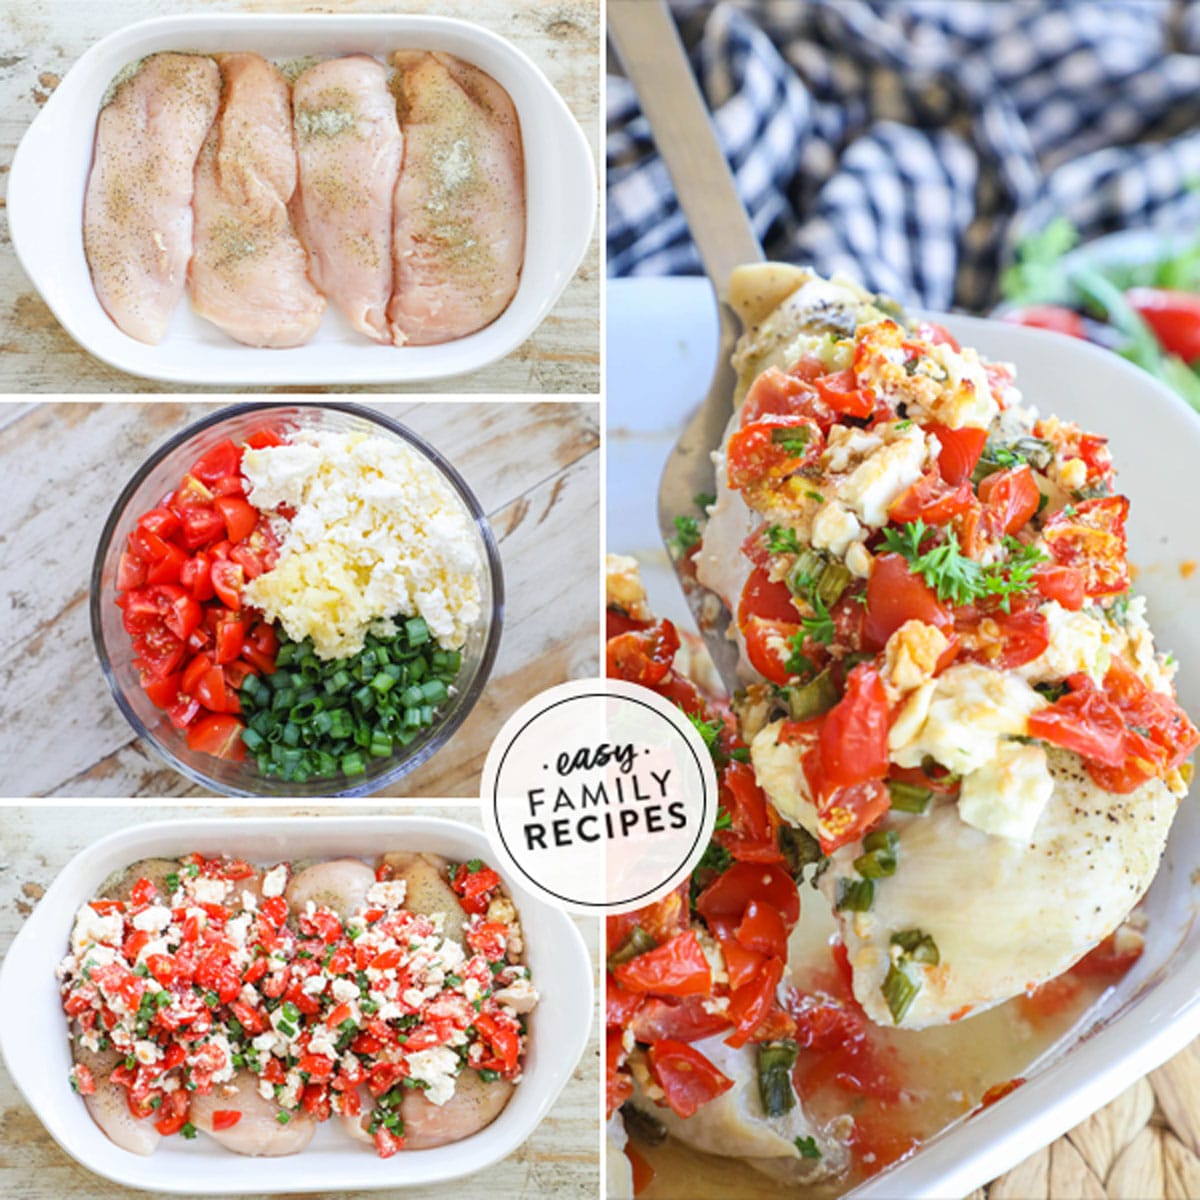 Feta Chicken Bake with Tomatoes